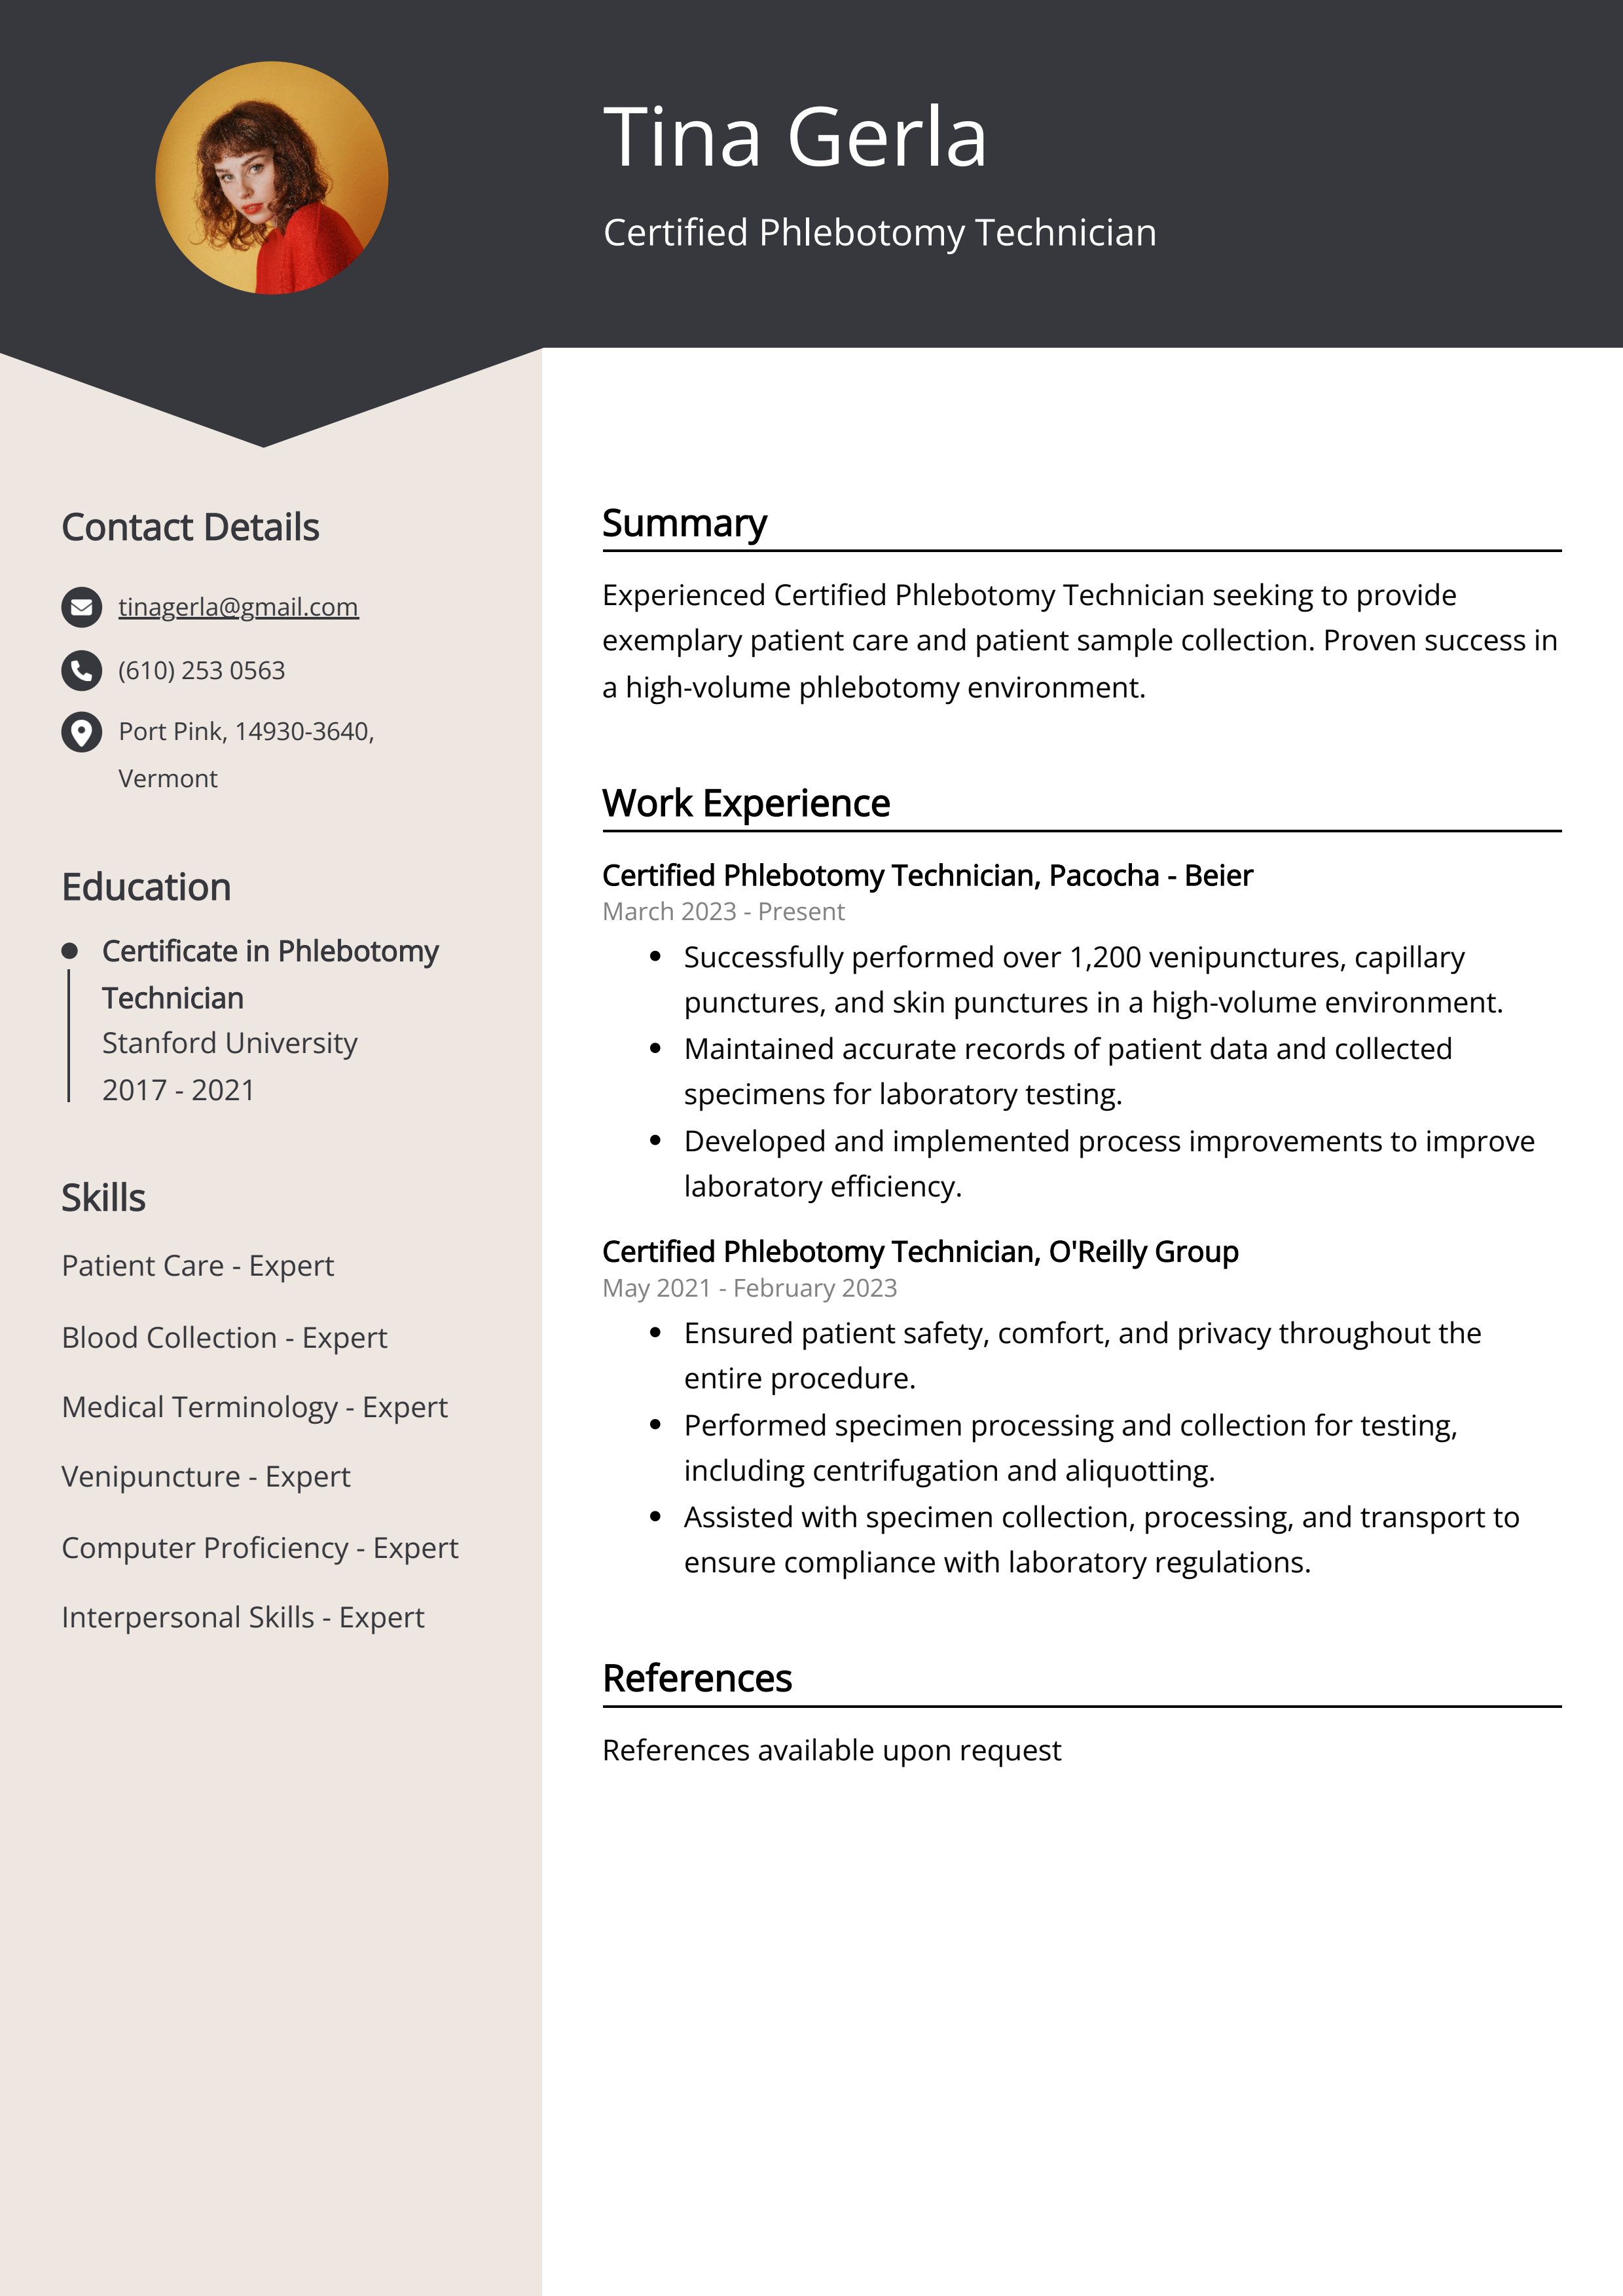 Certified Phlebotomy Technician CV Example